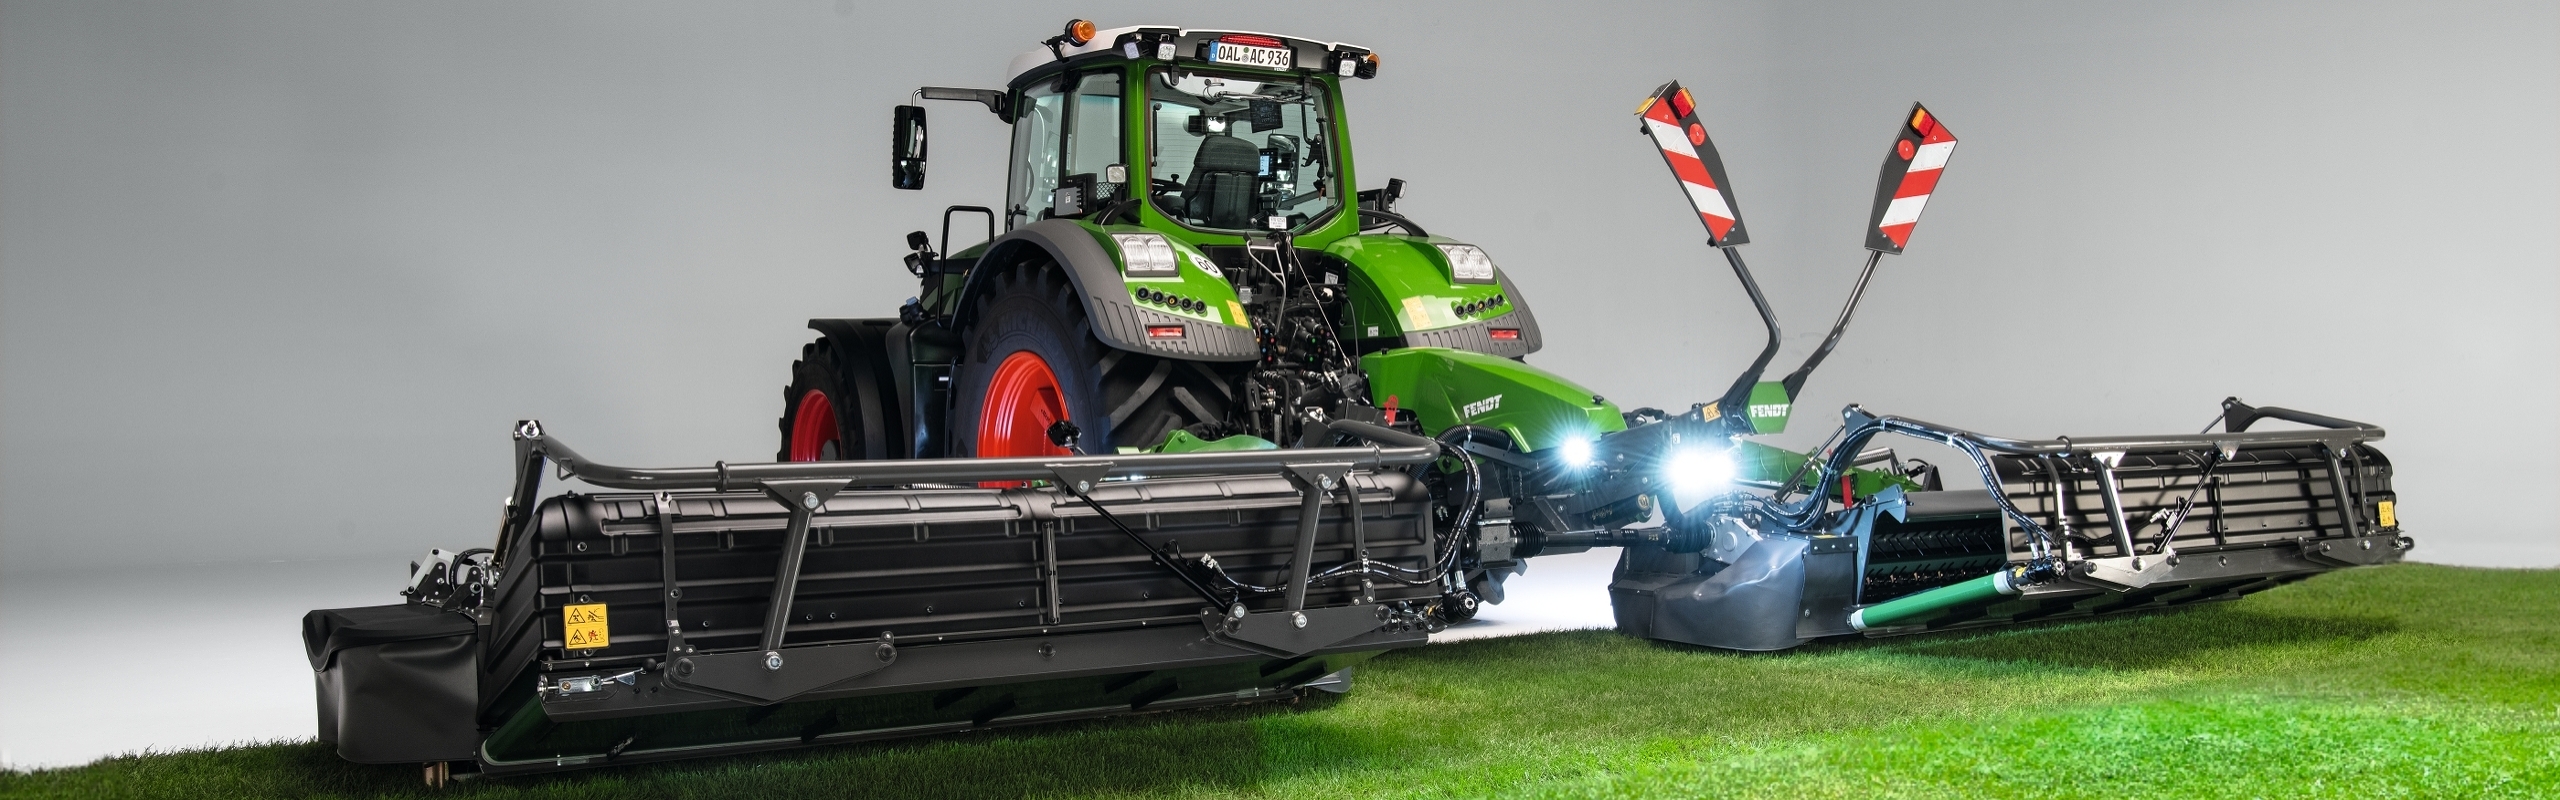 A Fendt tractor with a Fendt Slicer disc mower